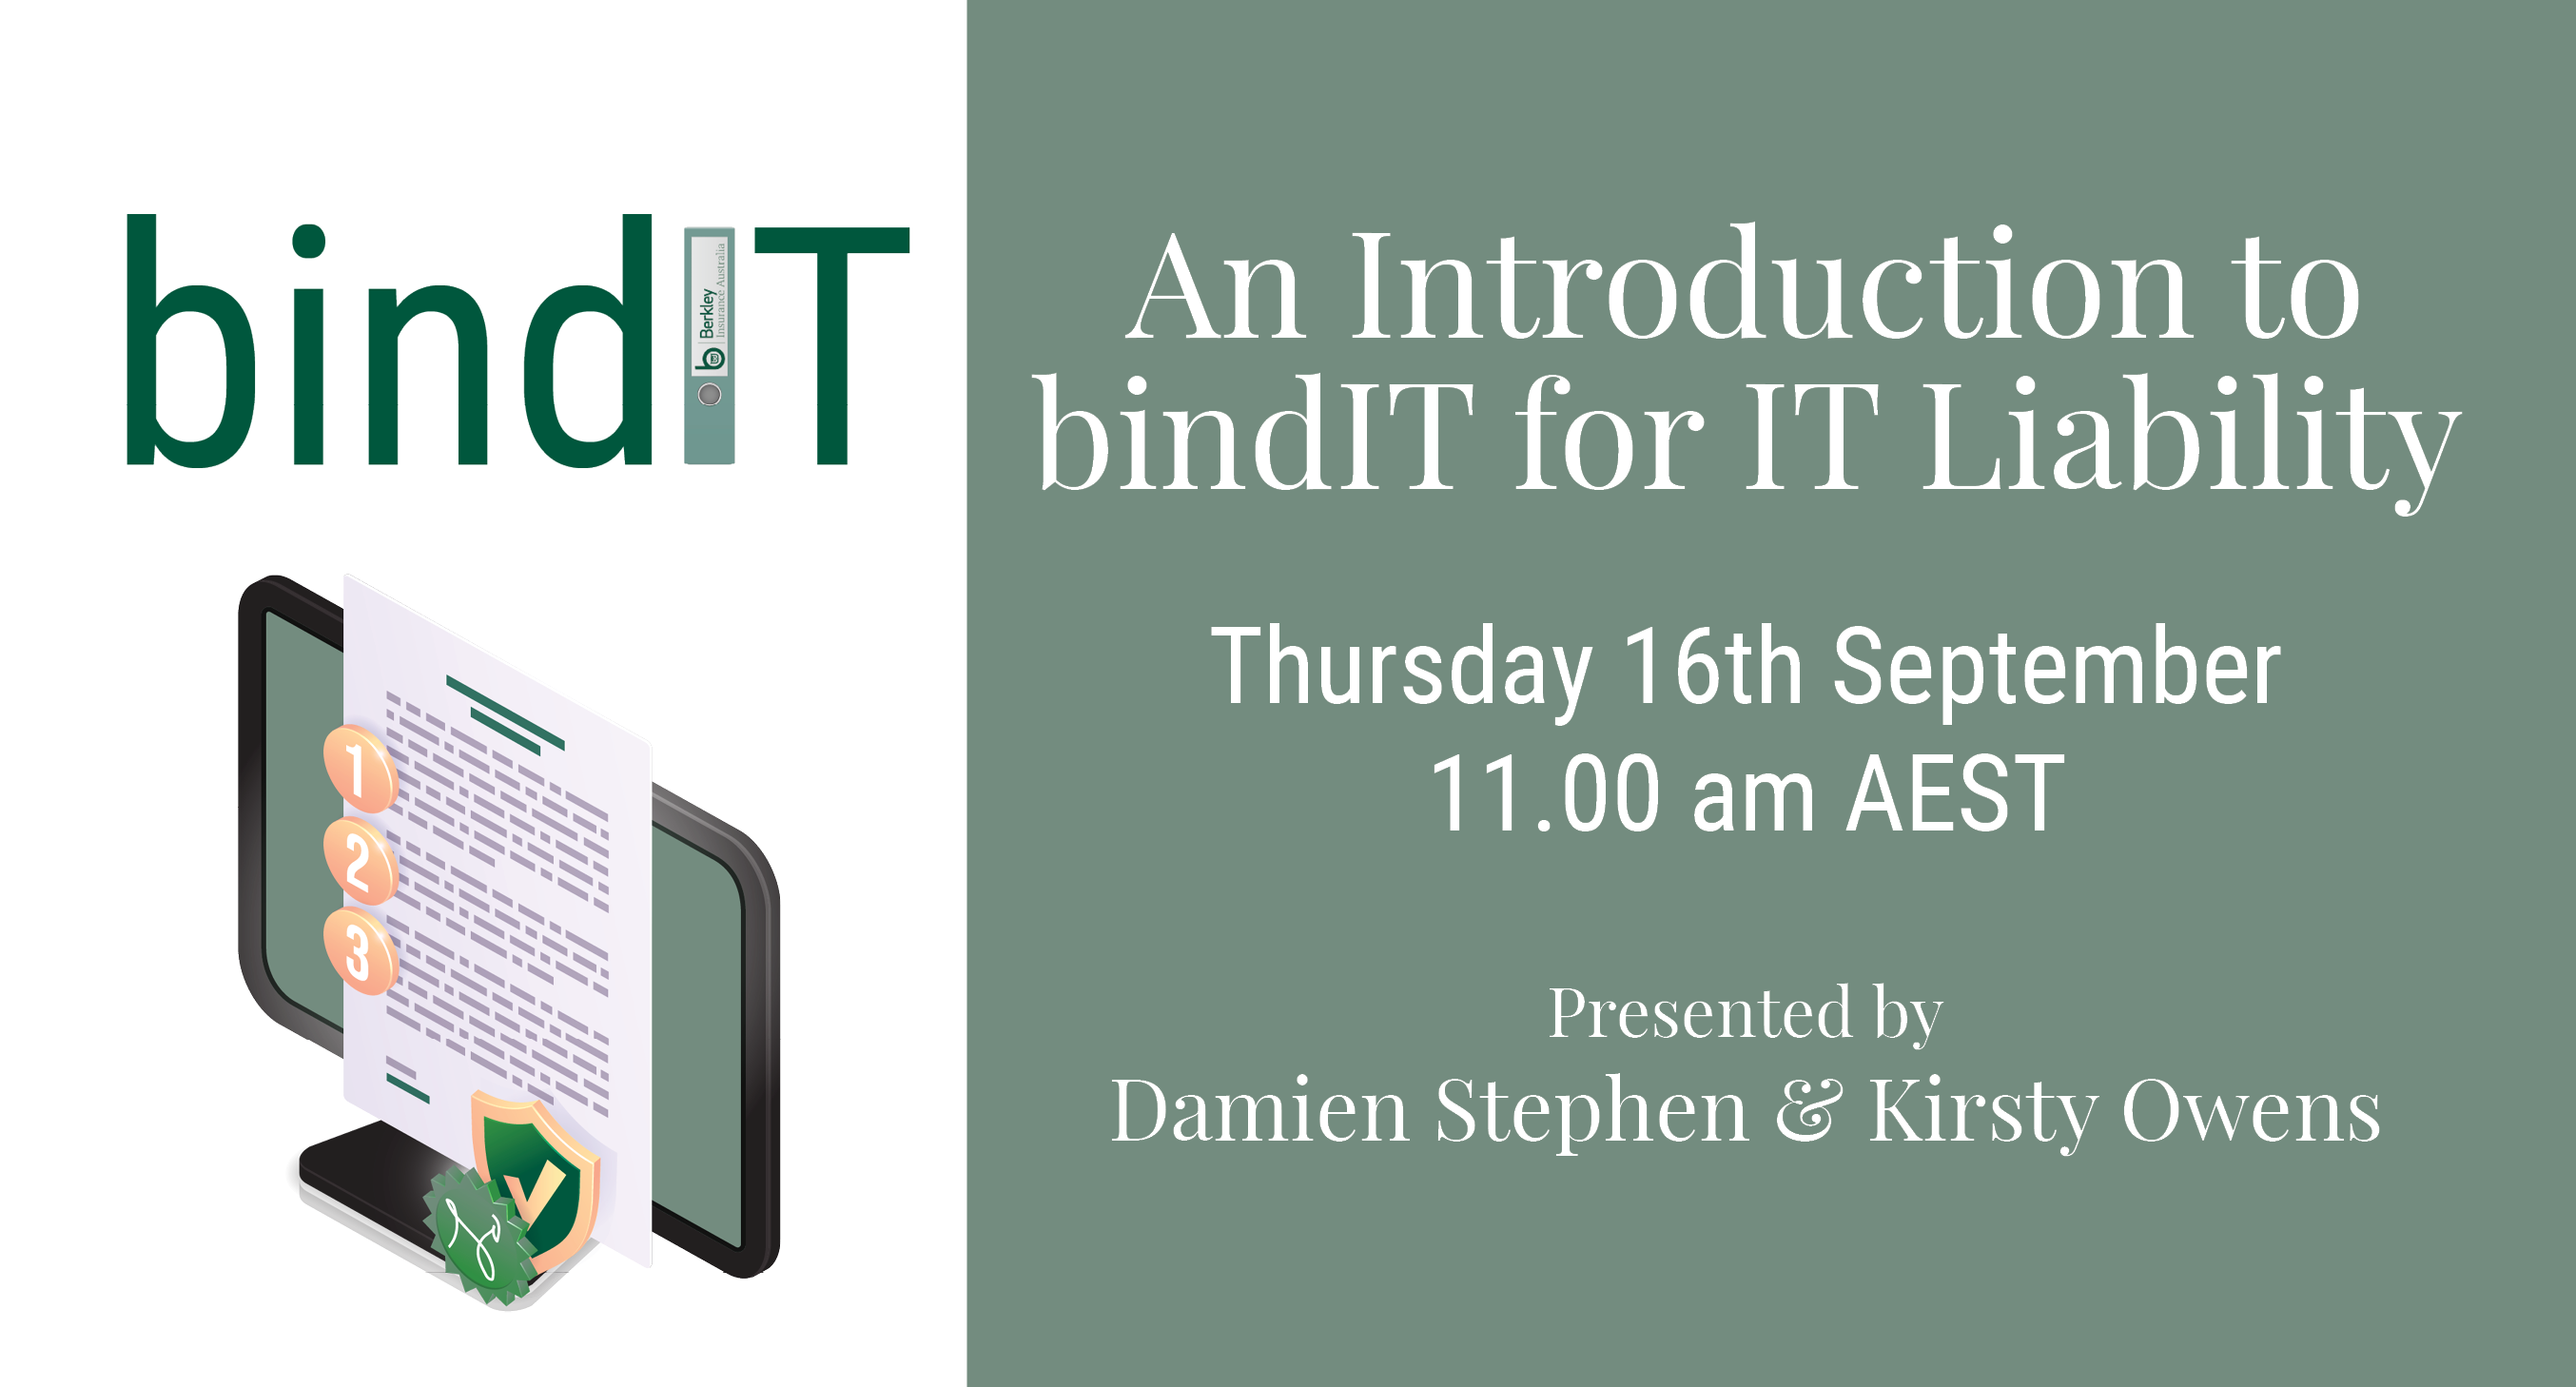 An Introduction to BindIT for IT Liability